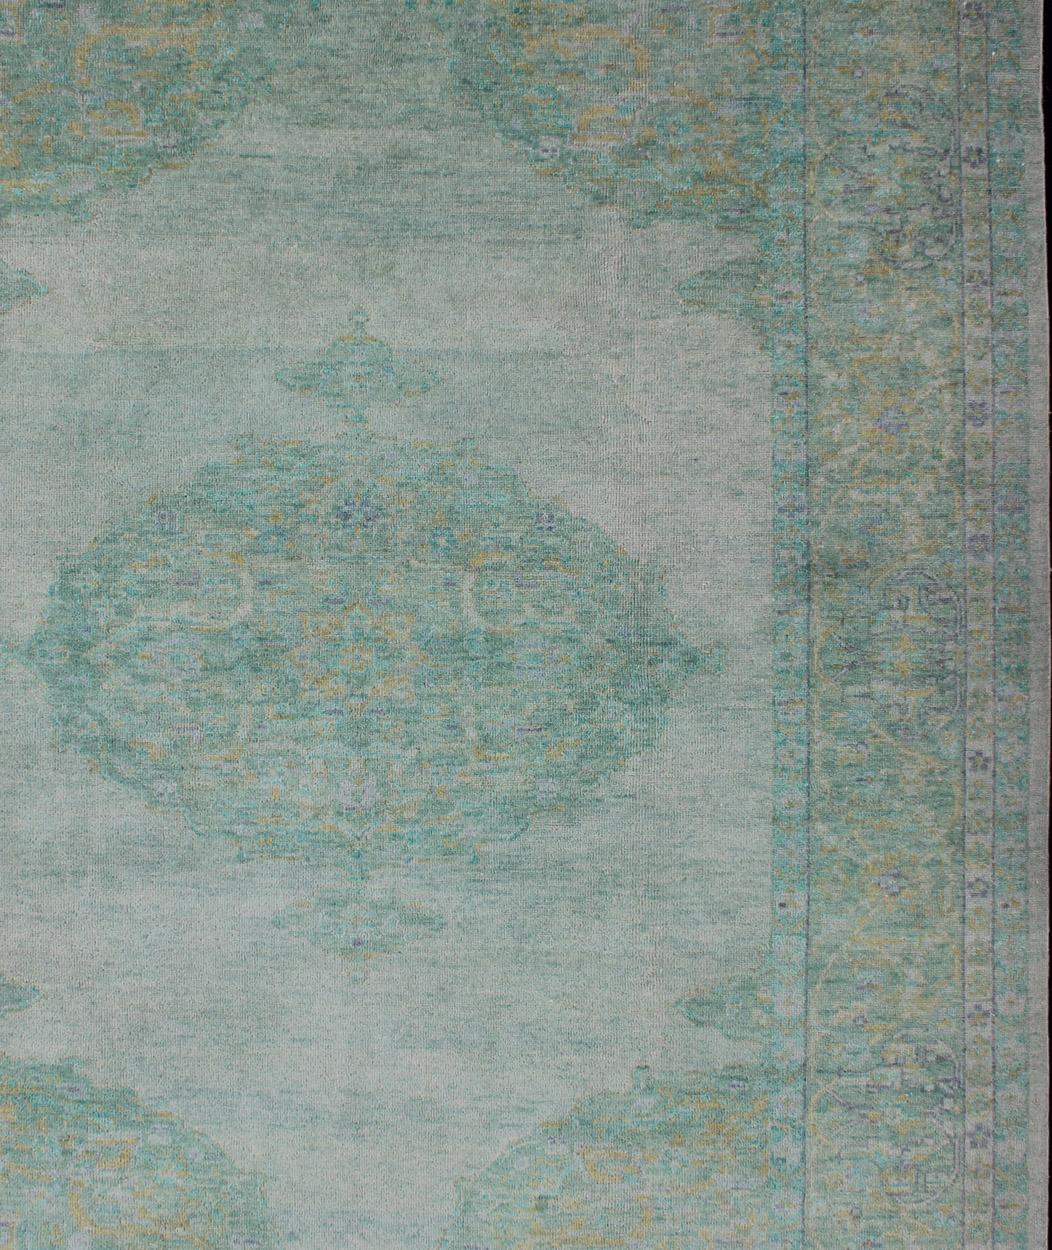 Modern Oushak rug, rug/OB-9242125, country of origin / type: India / Oushak, circa early-21st Century. Contemporary Indian Rug.

This hand-knotted Oushak rug features a floral medallion design in various shades of green, making this rug a great